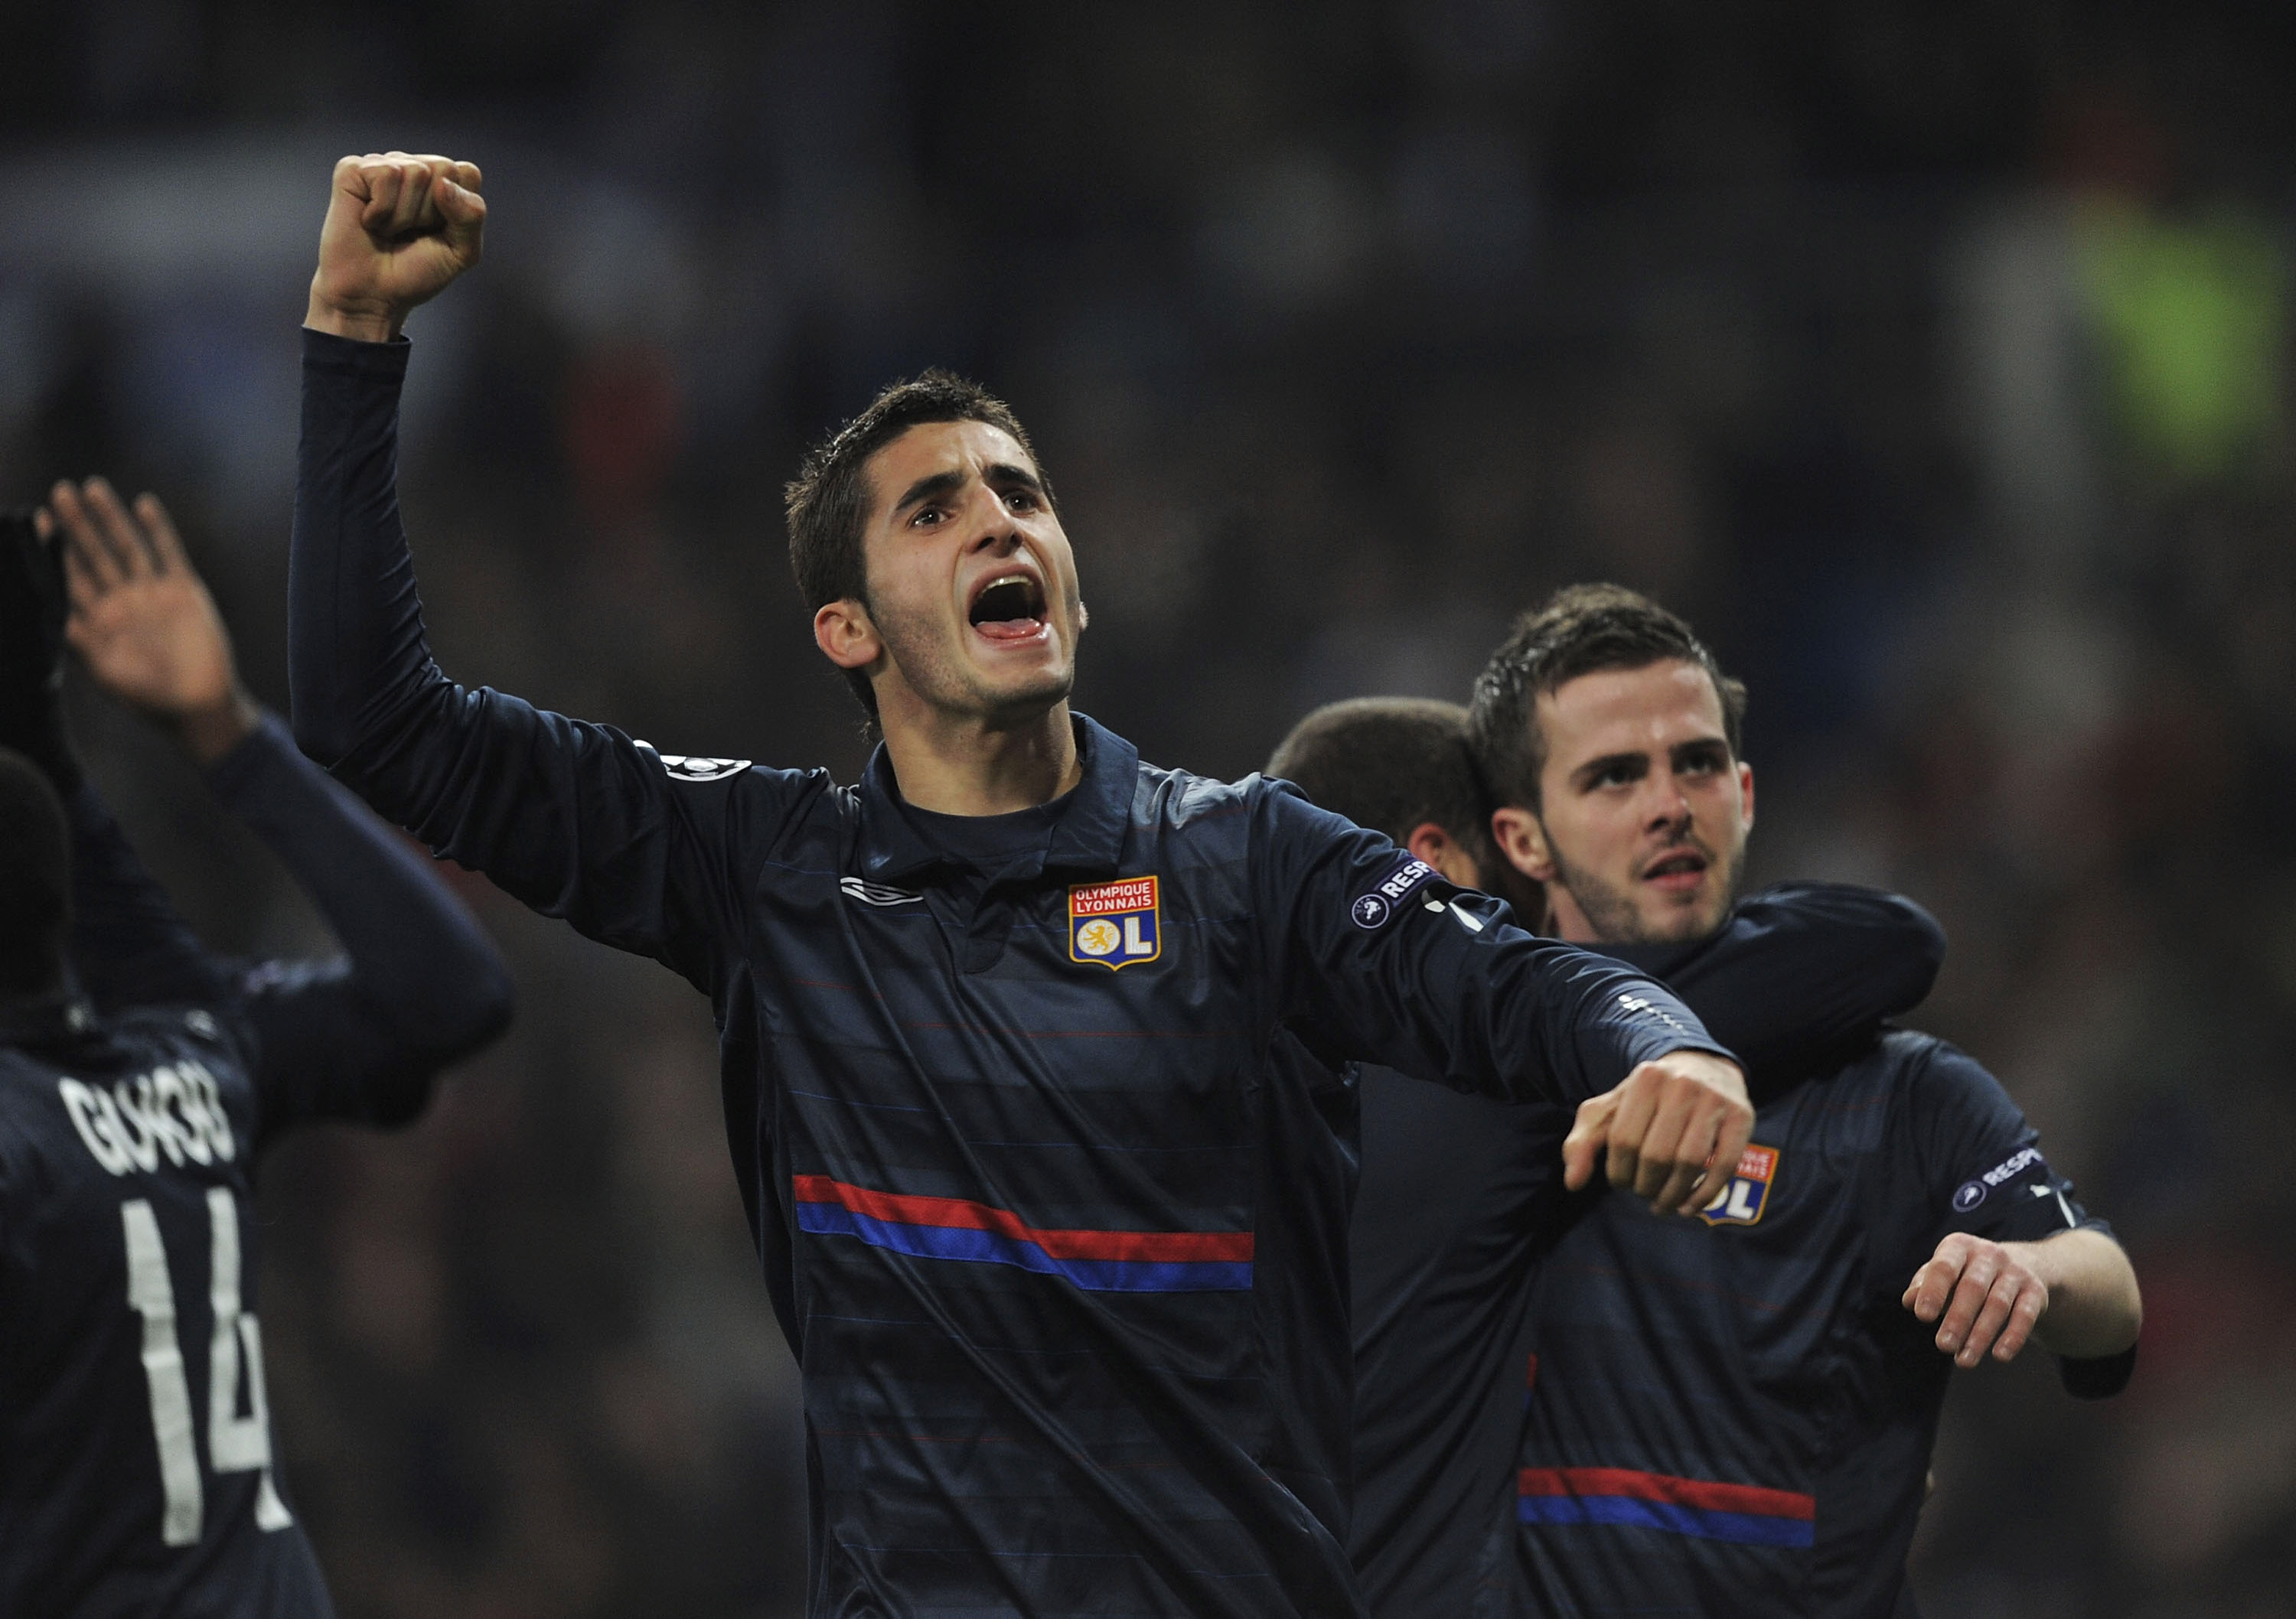 MADRID, SPAIN - MARCH 10:  Maxime Gonalons of Olympique Lyonnais celebrates after Lyonnais' scored their first goal during the UEFA Champions League round of 16 2nd leg match between  Real Madrid and Olympique Lyonnais at Estadio Santiago Bernabeu on Marc